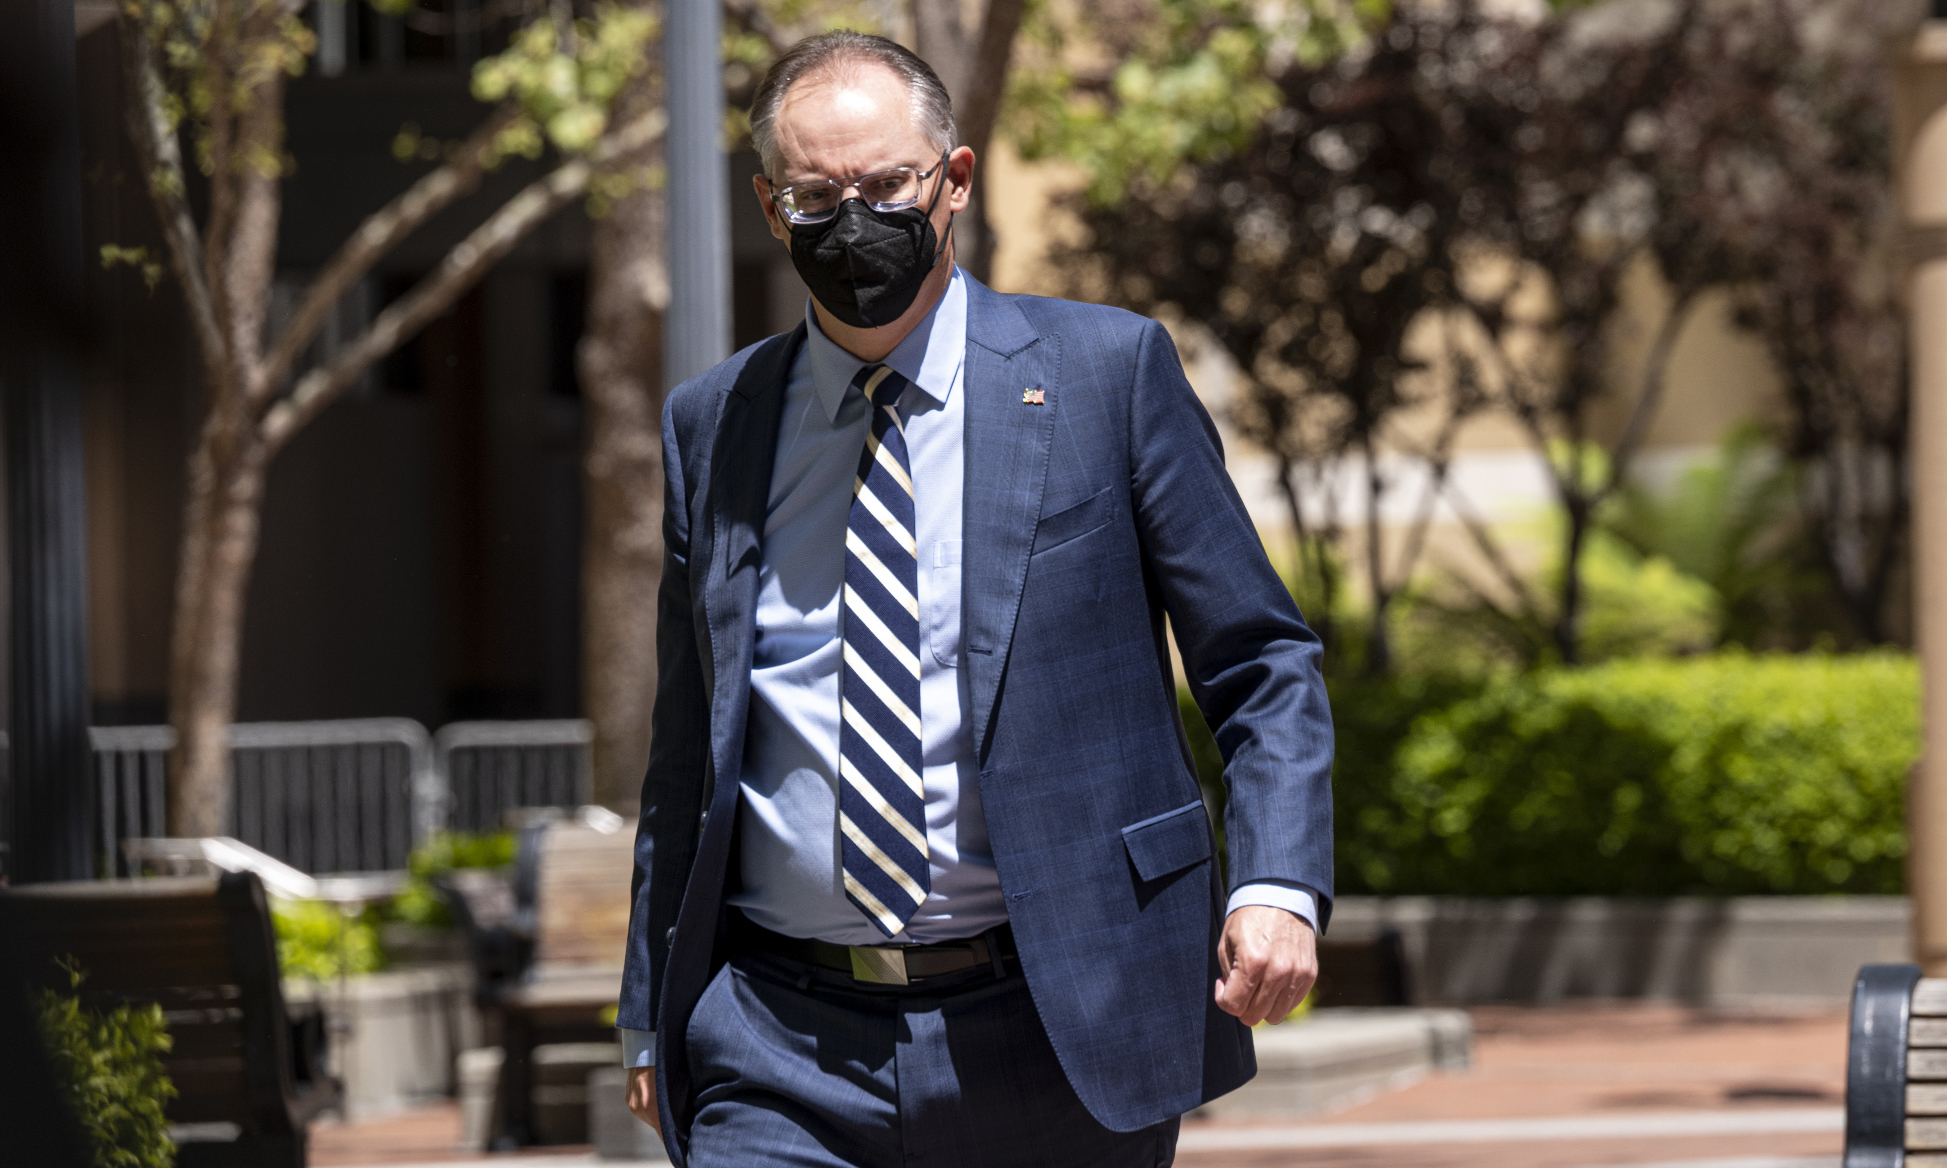 Tim Sweeney wearing a suit and cloth facemask, walking outside the US district courthouse in Oakland on the first day of the Epic v Apple trial.